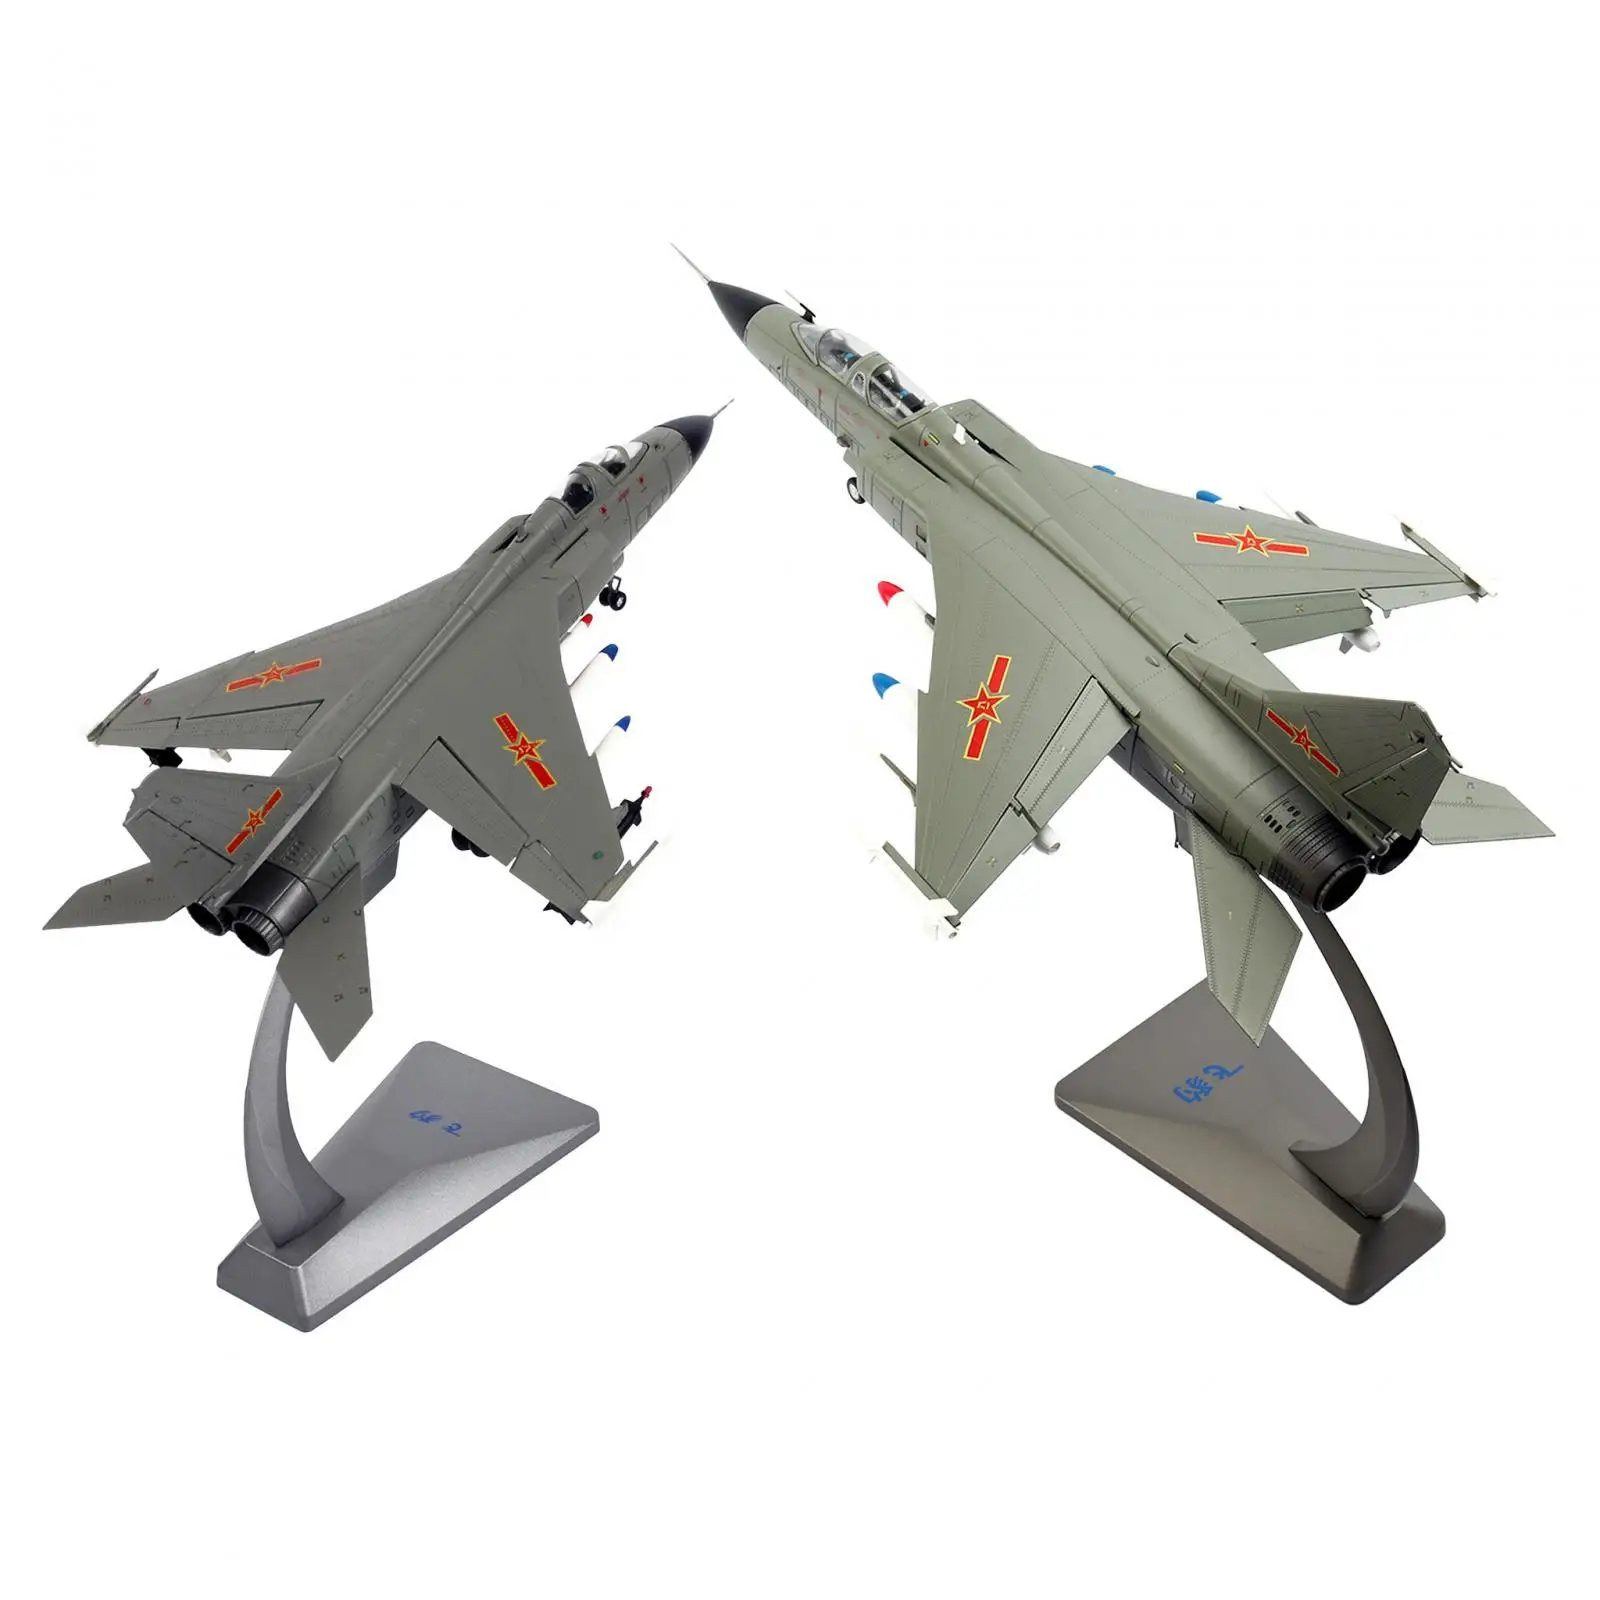 

Alloy JH7 Fighter Airplane Diecast Model Kids Adults Toy Miniature Toys with Base for Bedroom TV Cabinet Office Bookshelf Home